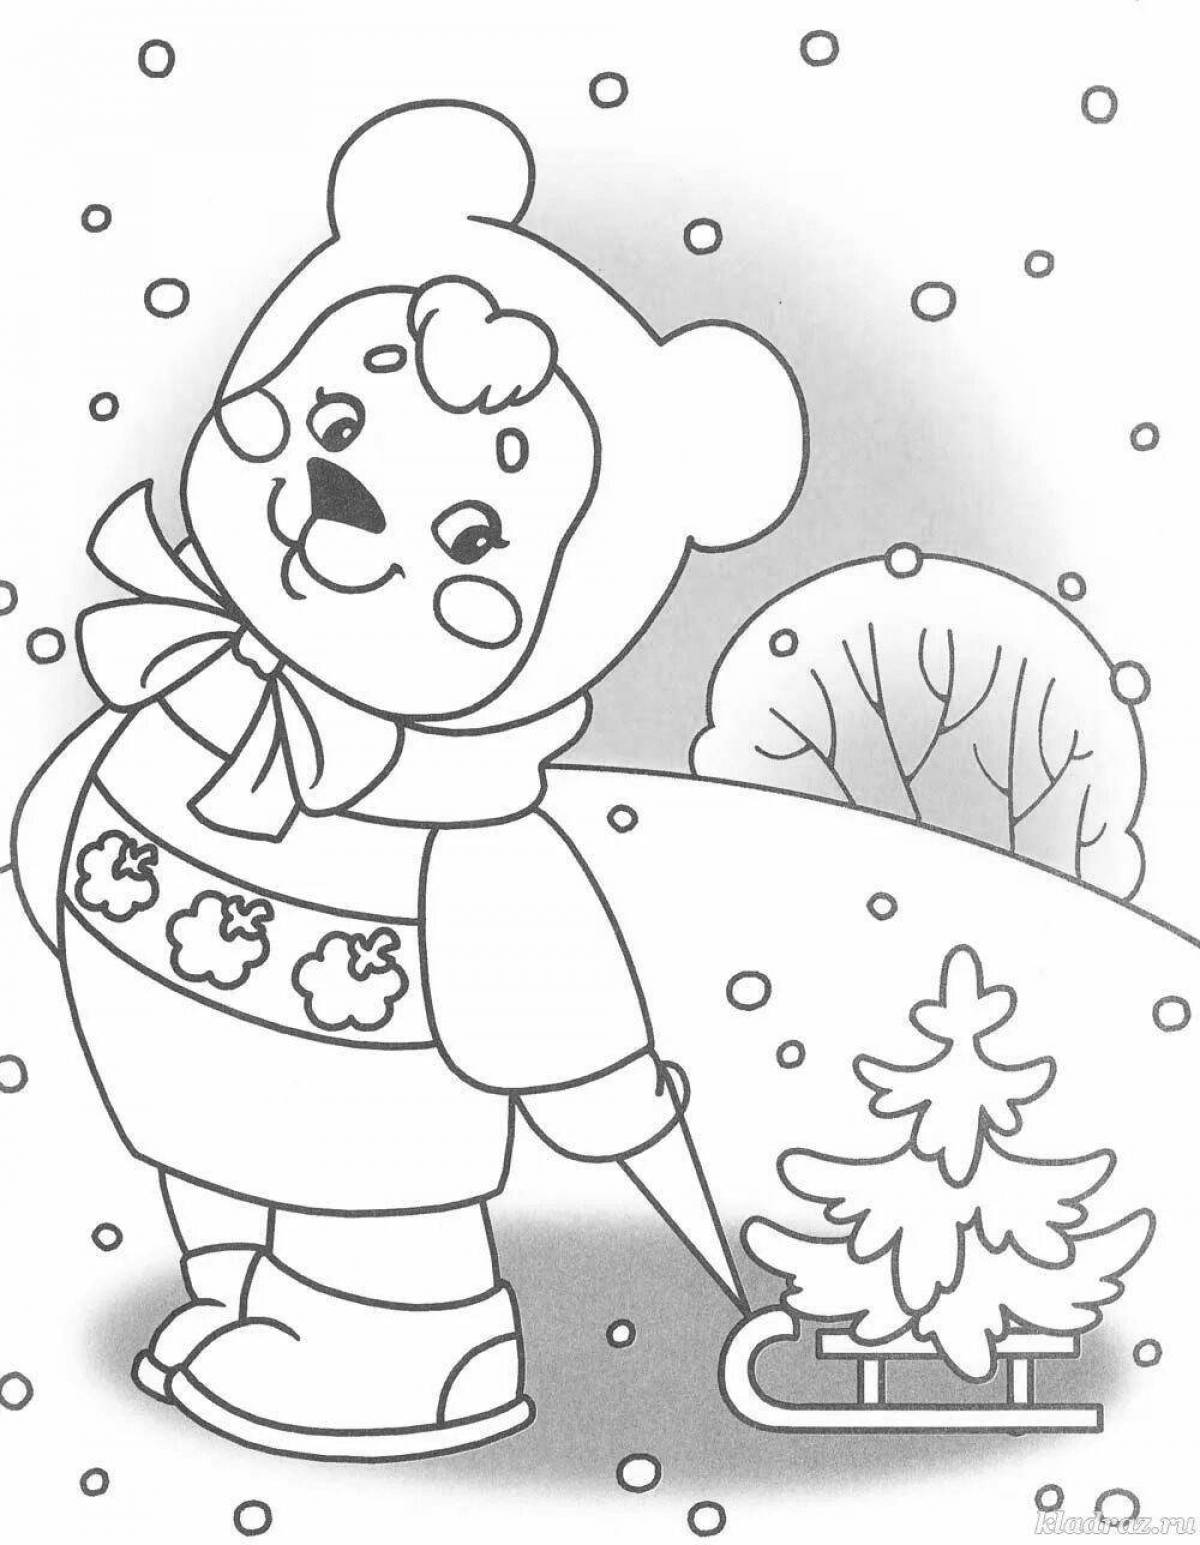 Glorious winter coloring for kids